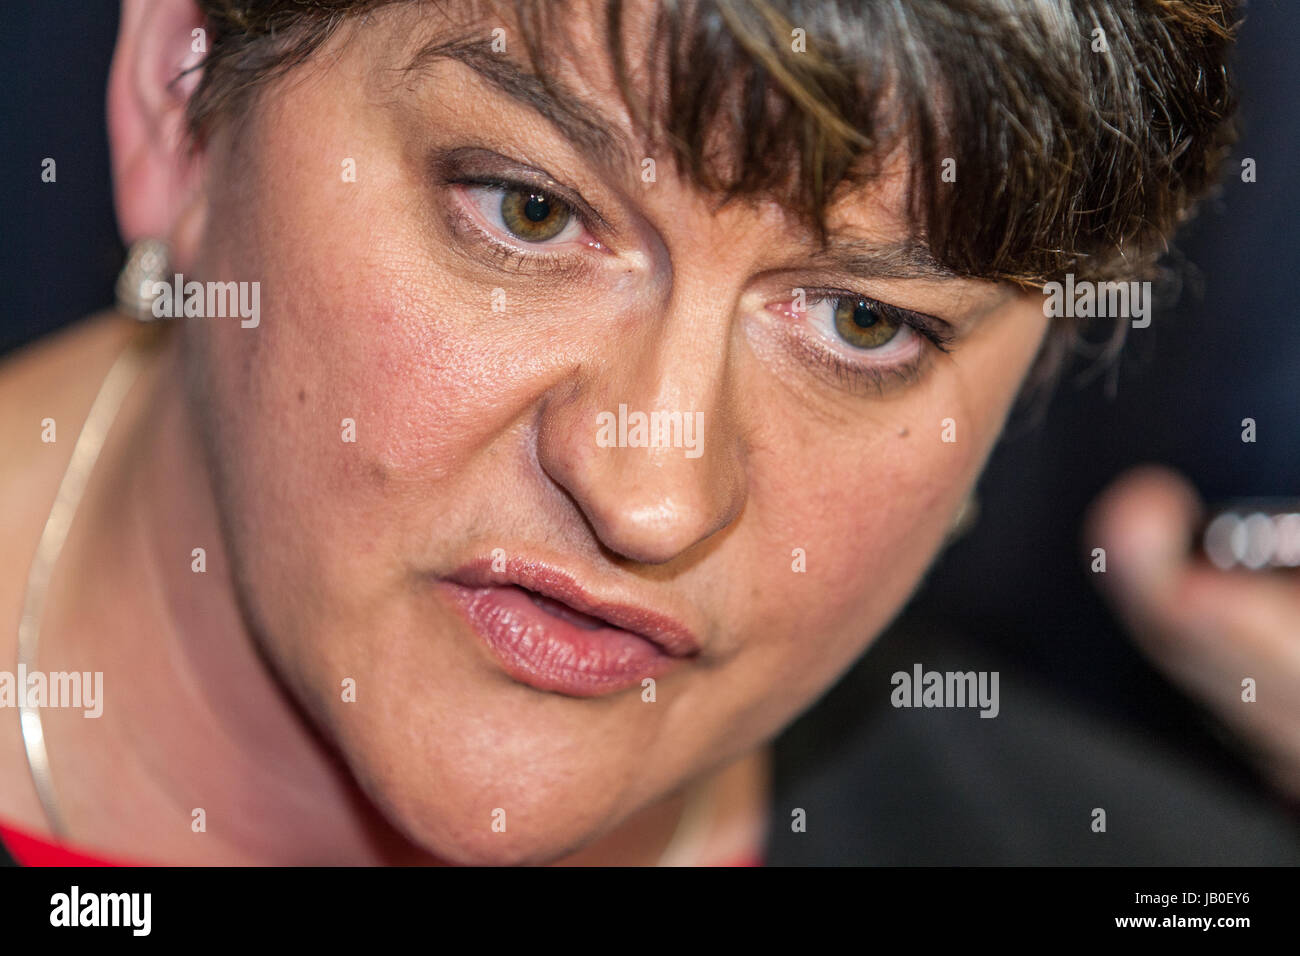 Belfast, Northern Ireland. 8th June 2017. Counting for the Belfast Area in the 2017 UK General Election got under way at the Titanic Exhibition Centre. Leader of DUP and First minister Arlene Foster at the Resut Count In Belfast Credit: Bonzo/Alamy Live News Stock Photo